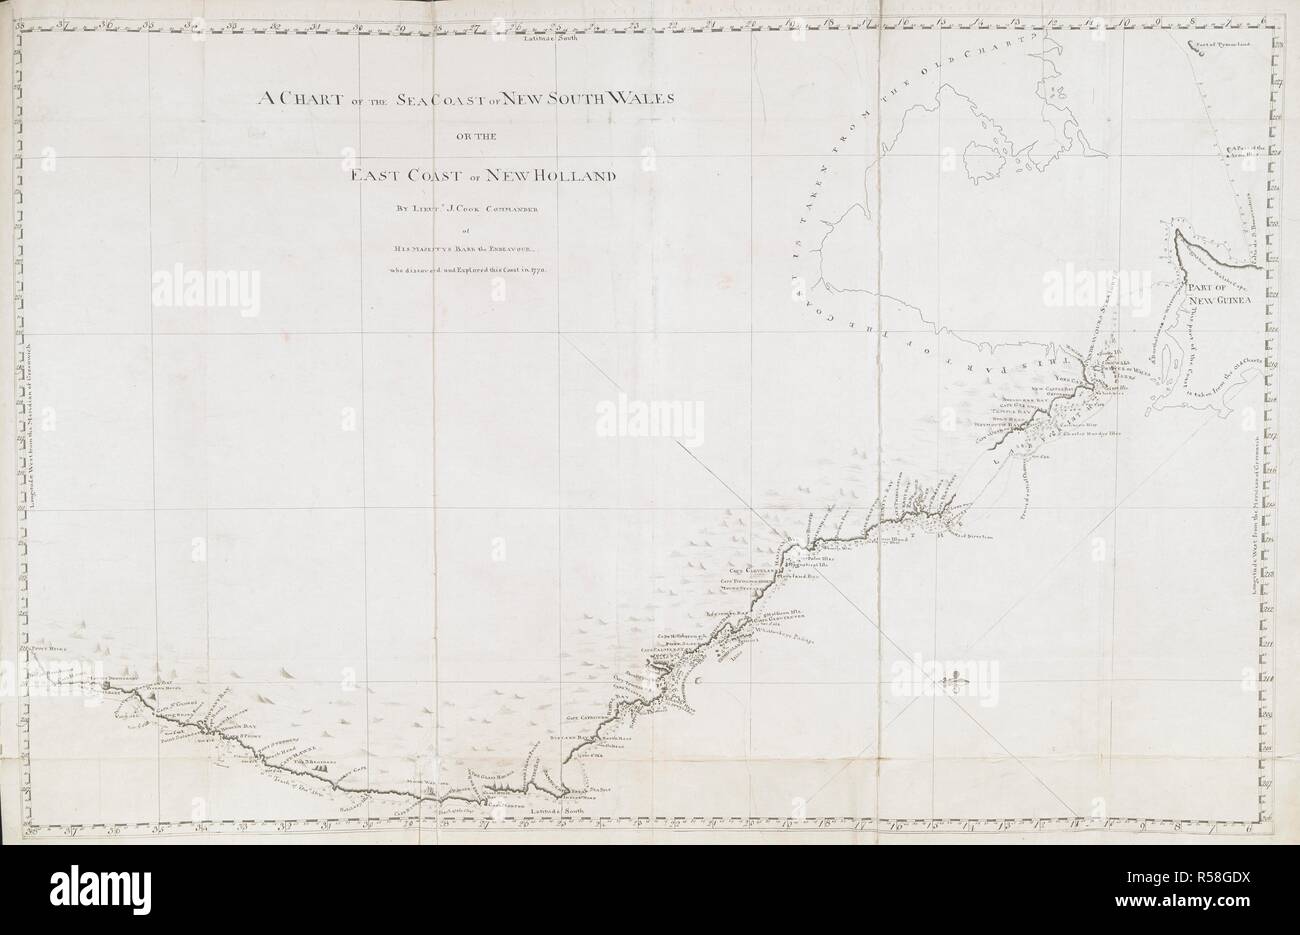 A chart of the sea coast of New South Wales, on the east coast of New Holland; drawn by Lieut. James Cook, who discovered and explored this coast in 1770. Charts, Plans, Views, and Drawings taken on board the Endeavour during Captain Cook's First Voyage, 1768-1771. 1770. Ms. 3 f. x 1 f. 11 in.; 91 x 58 cm. Source: Add. 7085, No.34. Language: English. Author: COOK, JAMES. PRAVAL, CHARLES. Stock Photo